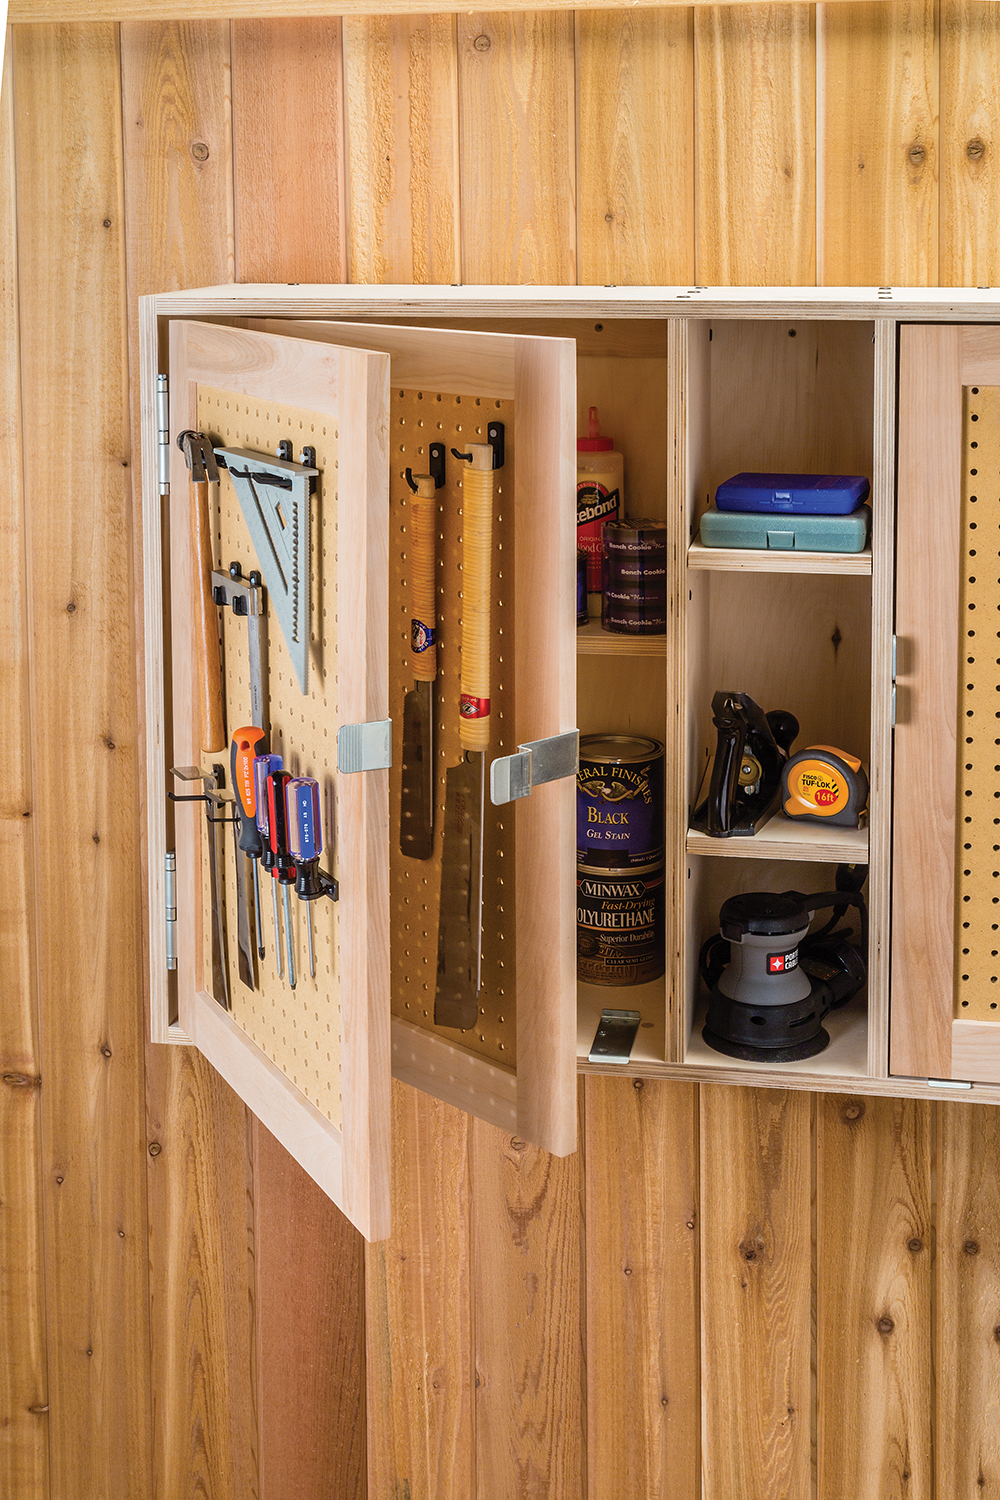 Using pegboard in the door panels effectively doubles the hanging storage capacity of cabinet doors.